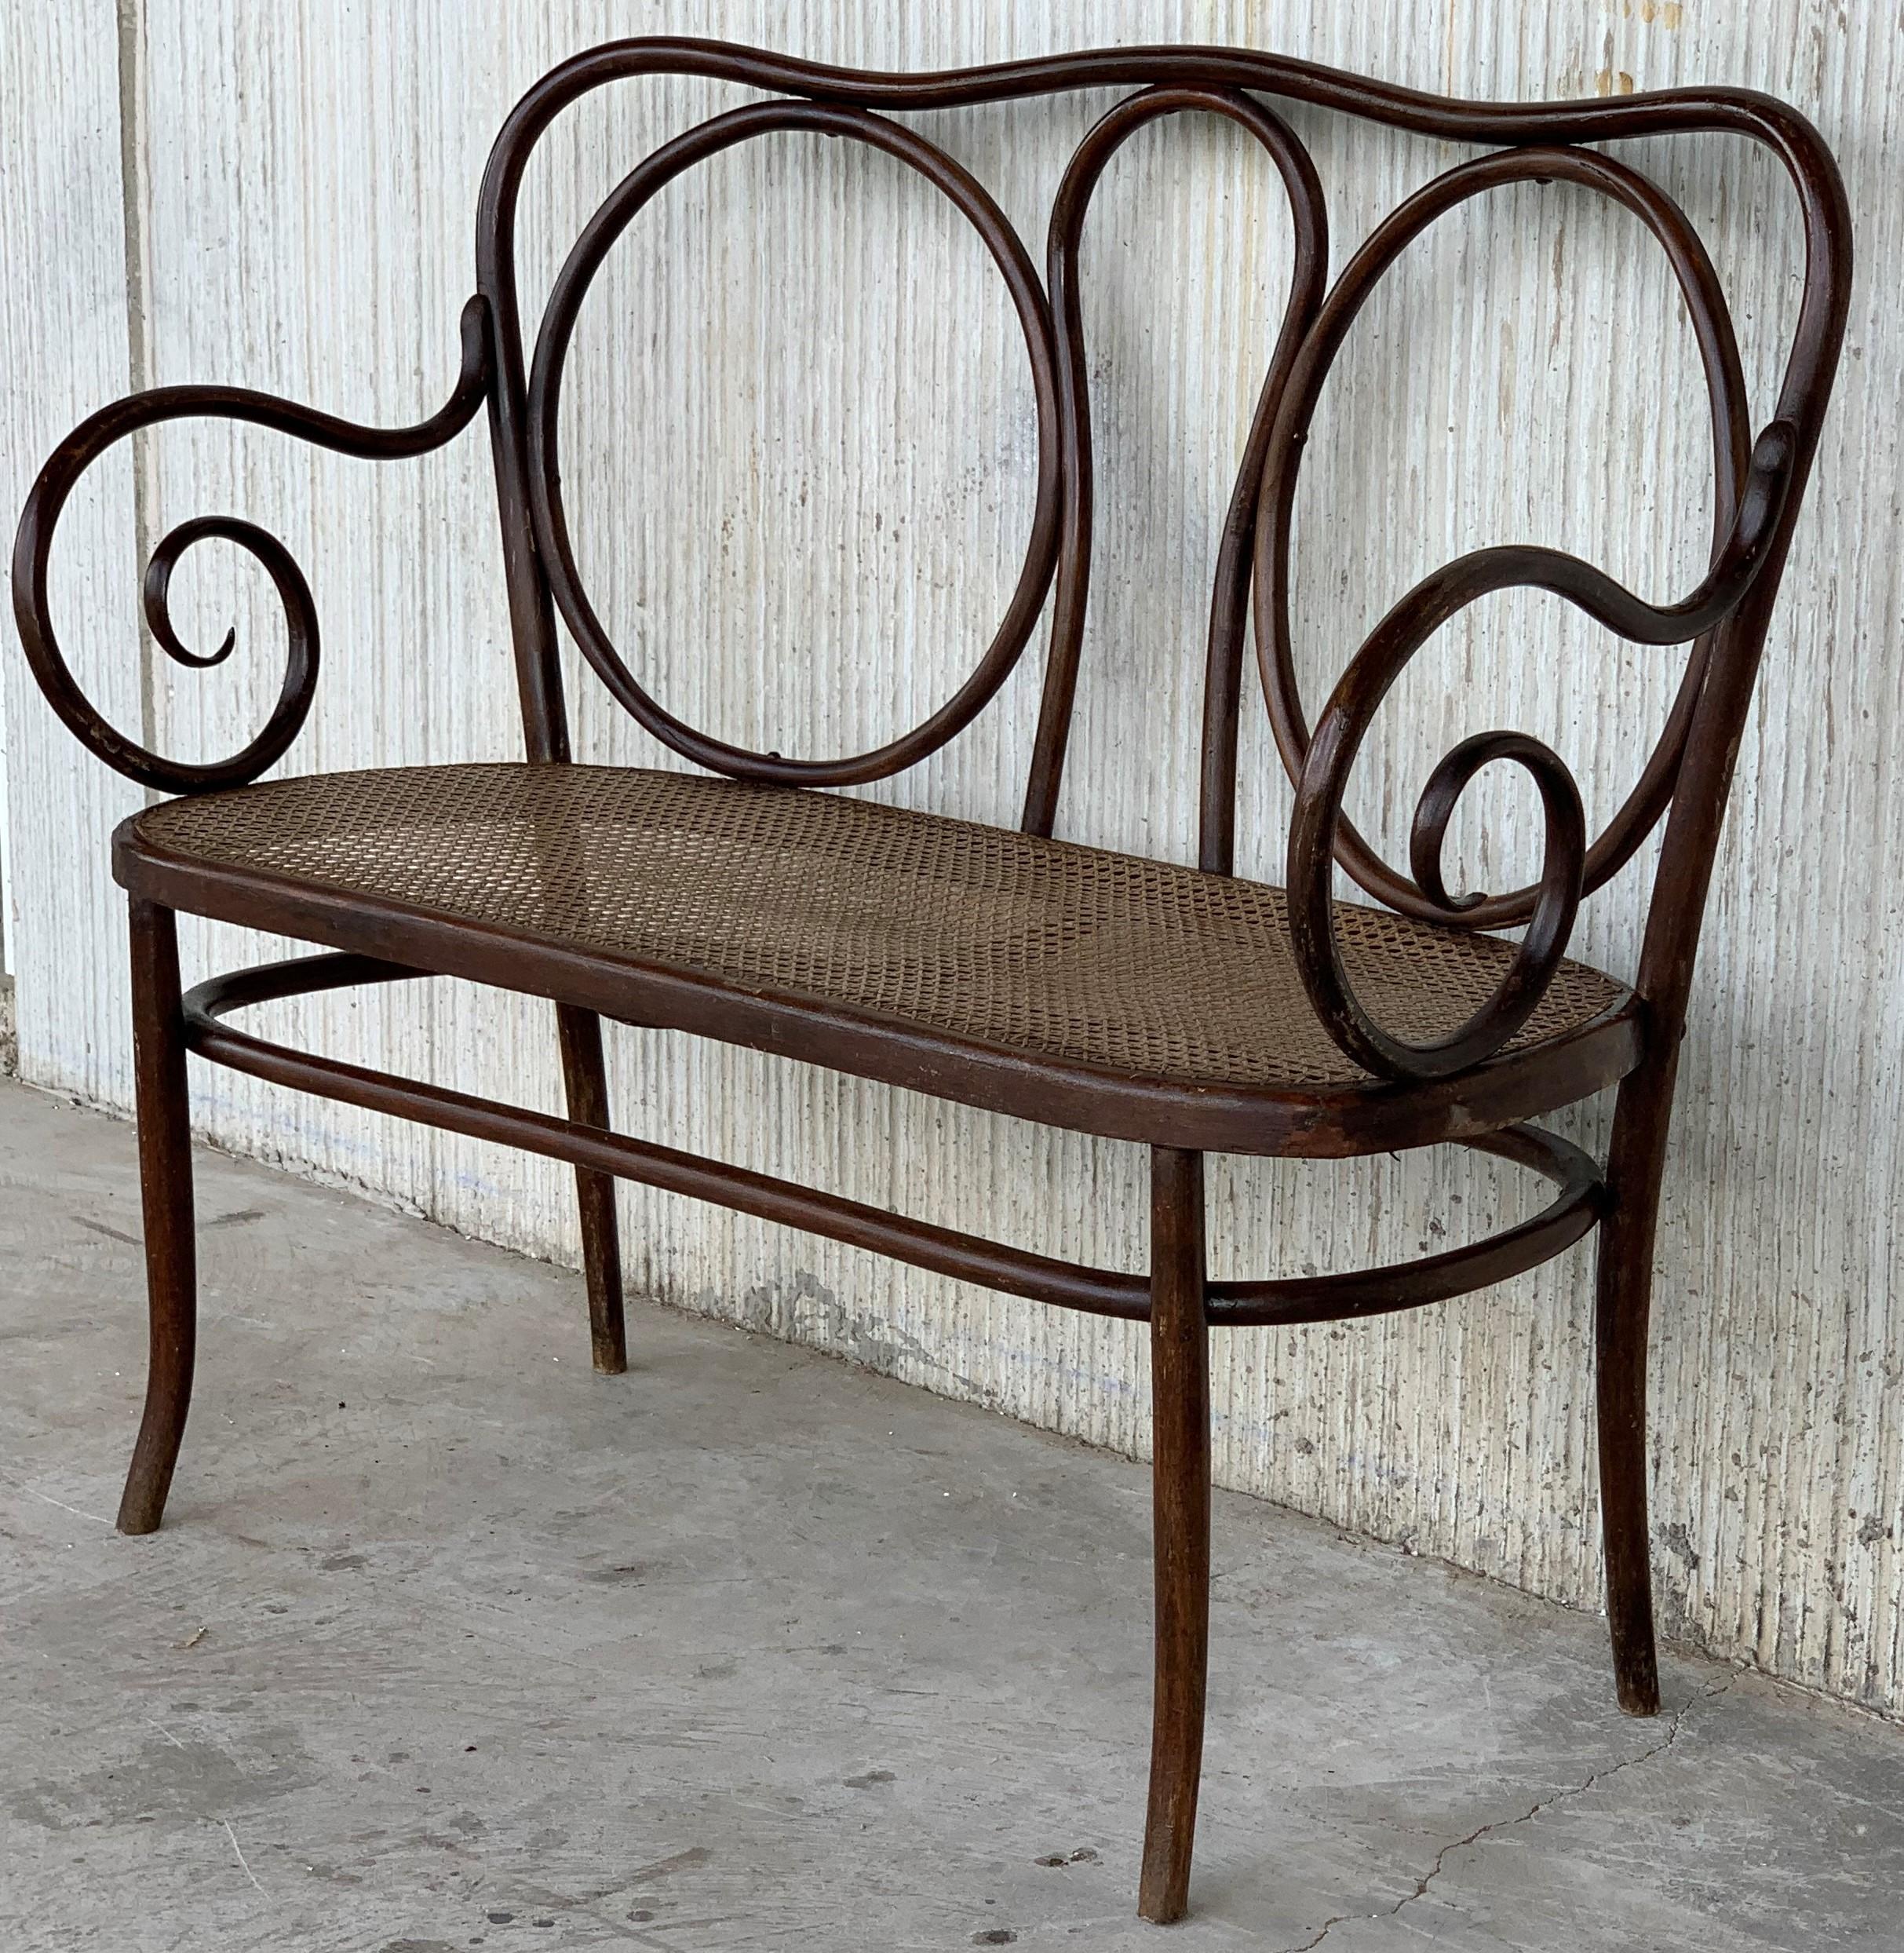 Early 20th Century 20th Century Bentwood Sofa in the Thonet Style, circa 1925, Caned Seat